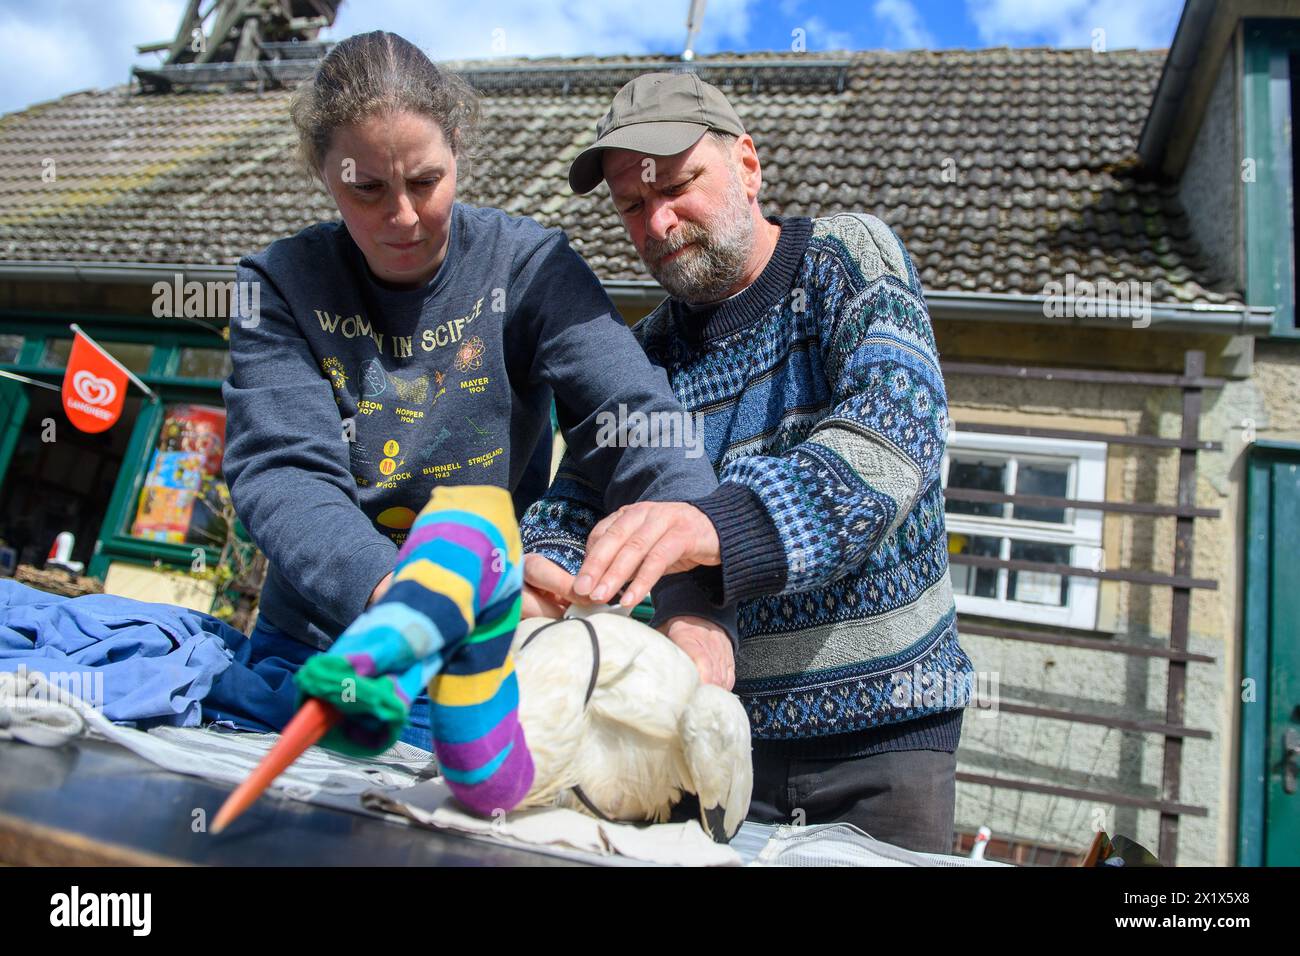 18 April 2024, Saxony-Anhalt, Loburg: Michael (l) and Antje Kaatz from Storchenhof Loburg attach a transmitter to a white stork. The stork had been injured in a fight with another stork and had been recovering at the stork farm over the past few weeks in April. The stocking over the stork's head serves to calm the animal. The animal was released back into the wild in the afternoon. A total of two white storks were released into the wild in Loburg. The Storchenhof is a bird sanctuary that aims to preserve white storks and their habitats in the state of Saxony-Anhalt. Photo: Klaus-Dietmar Gabber Stock Photo